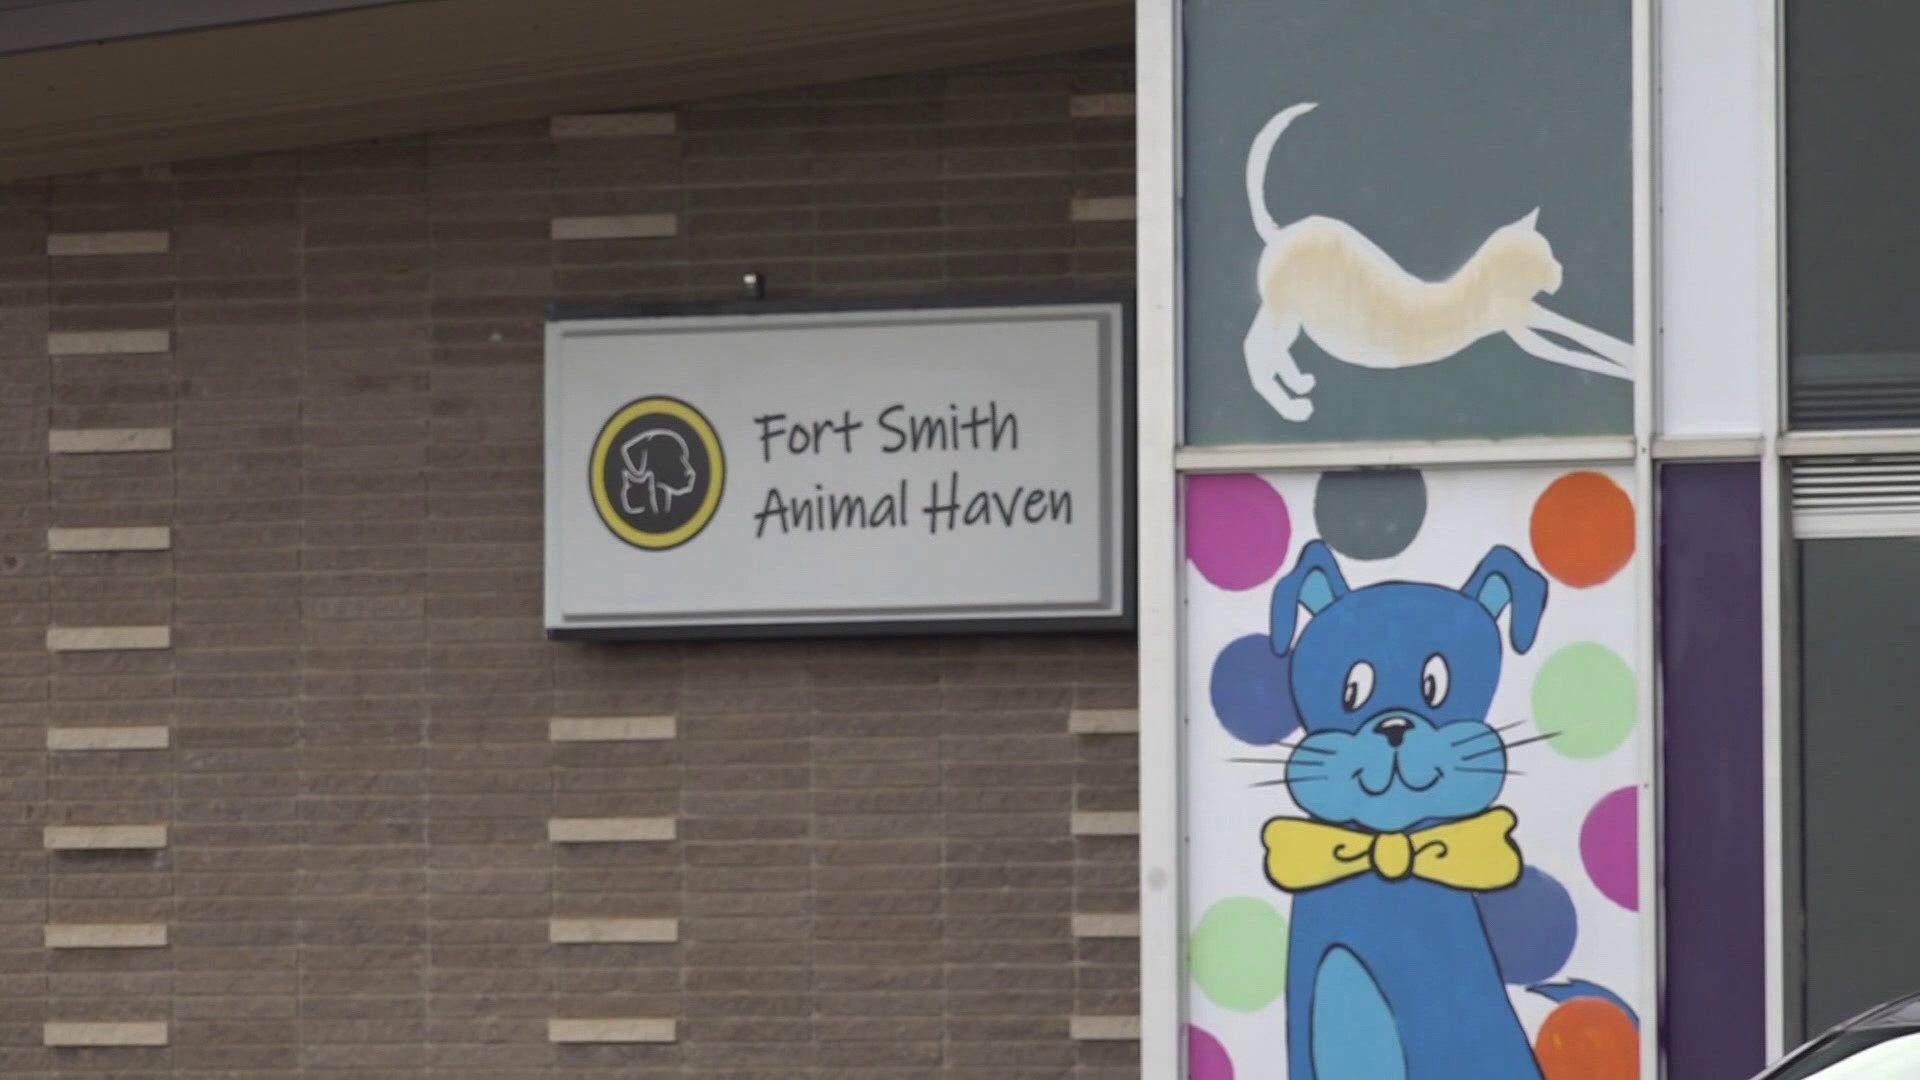 In a special meeting, the Fort Smith Audit Advisory Board met with members of the Animal Haven to discuss a draft audit of the shelter.